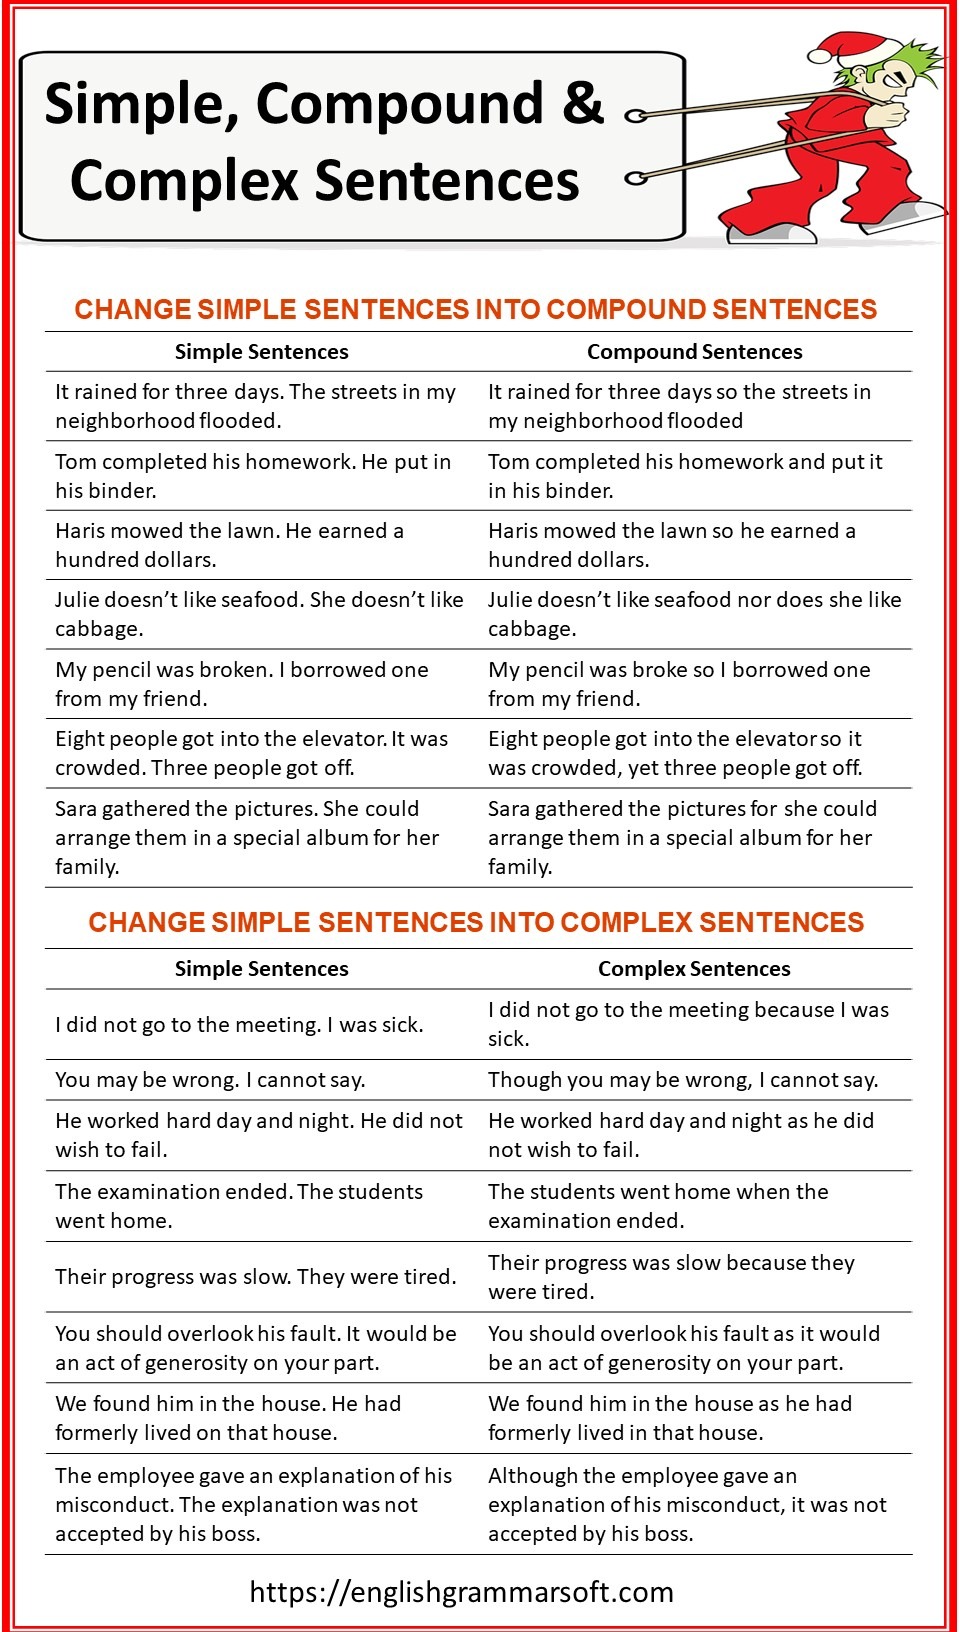 Simple, Compound and Complex Sentences [Explained with Examples